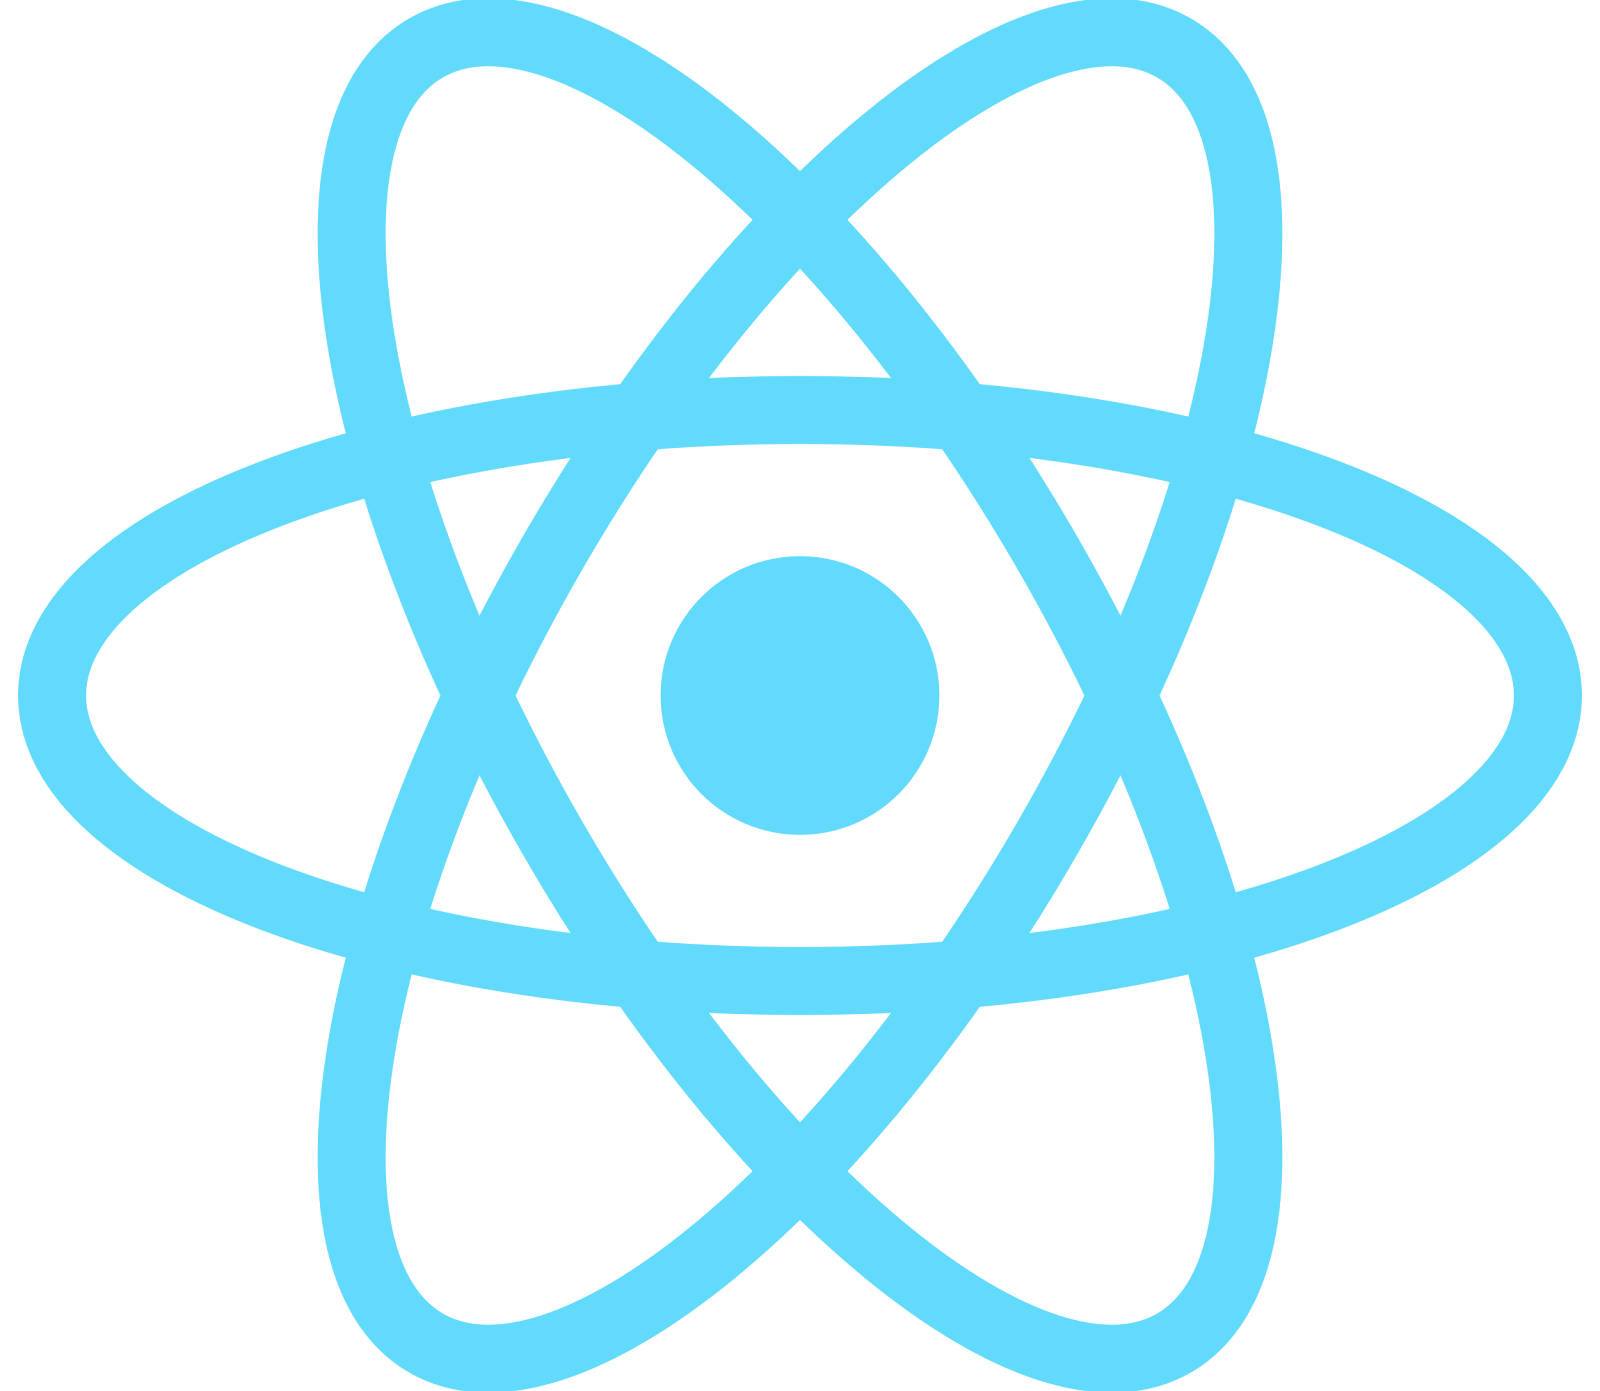 React Native App Development Guide: Challenges and Best Practices